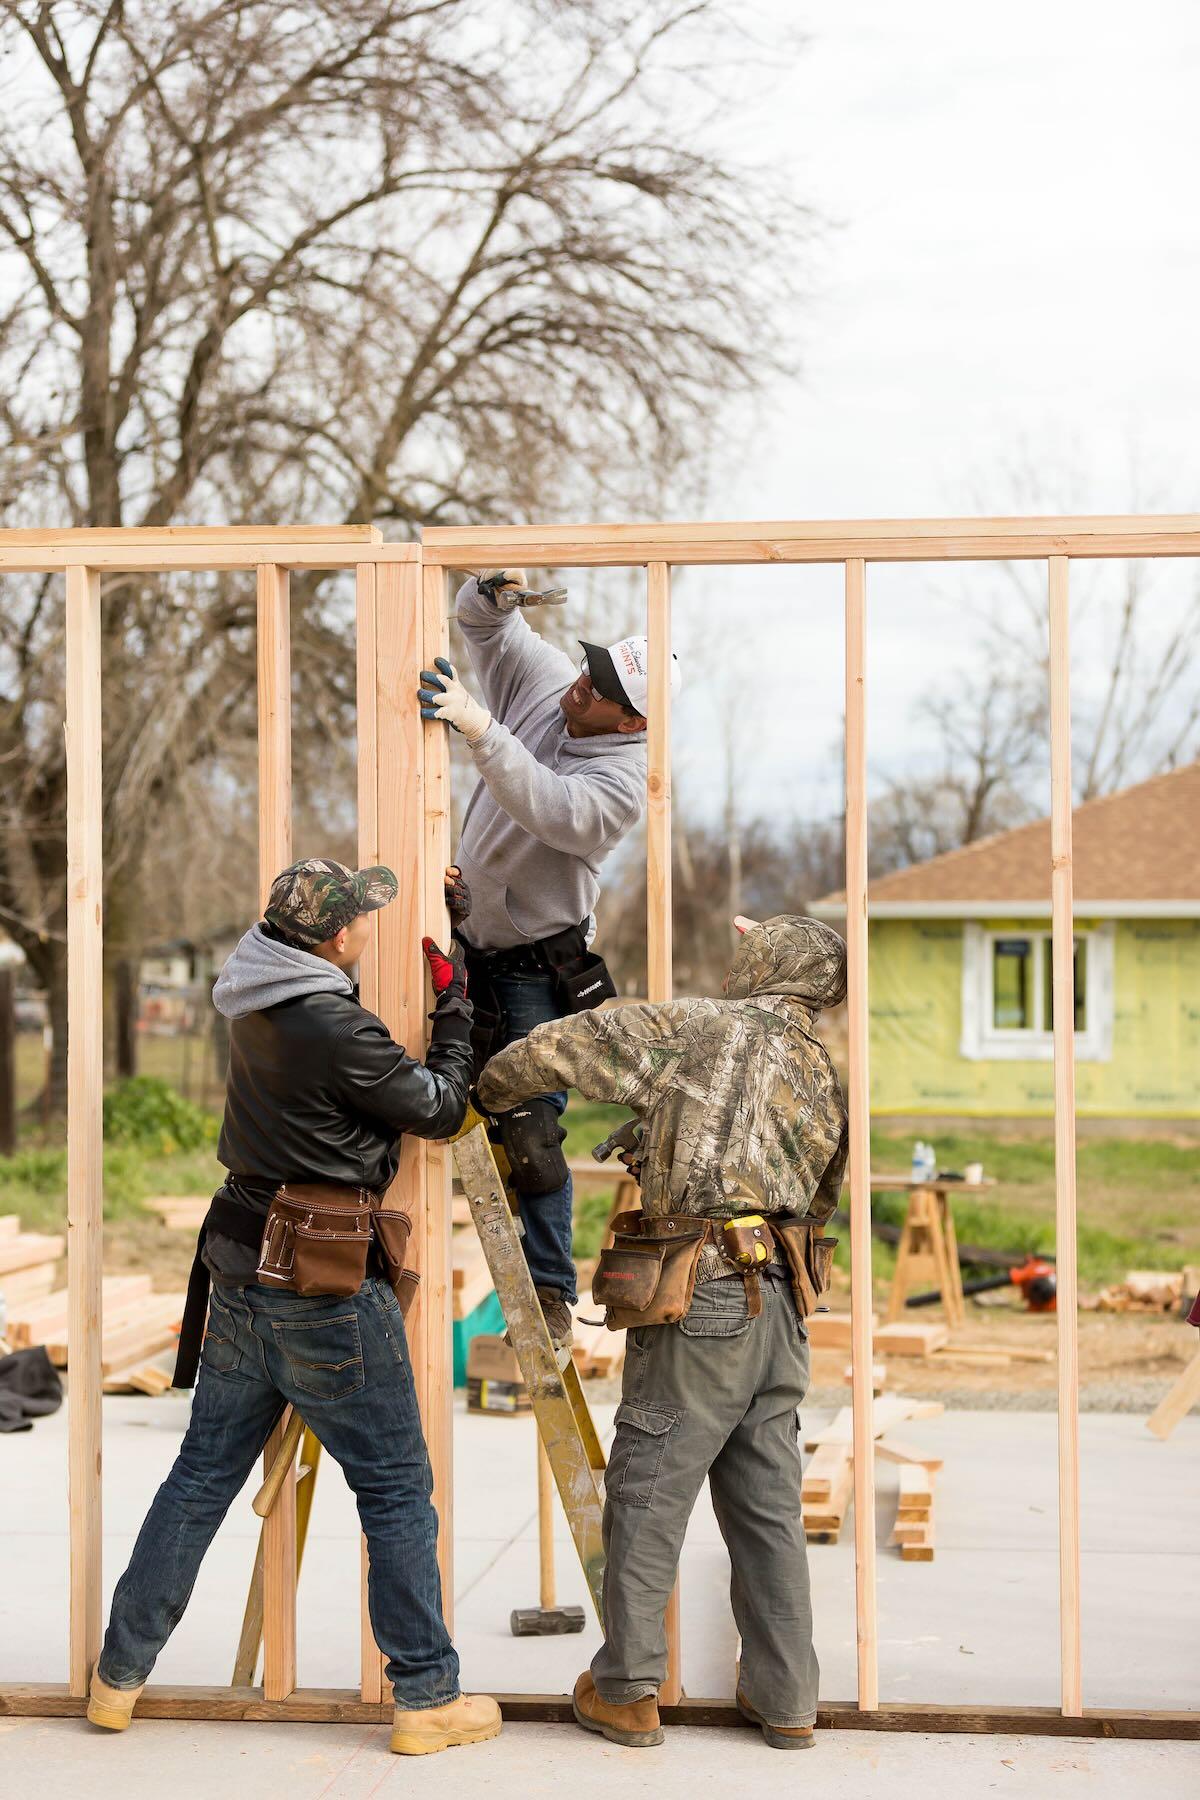 A photo shows a team of volunteers working on a single-family home.  They are working on a wall made of two-by-fours. One of them is standing on a ladder and hammering a nail.